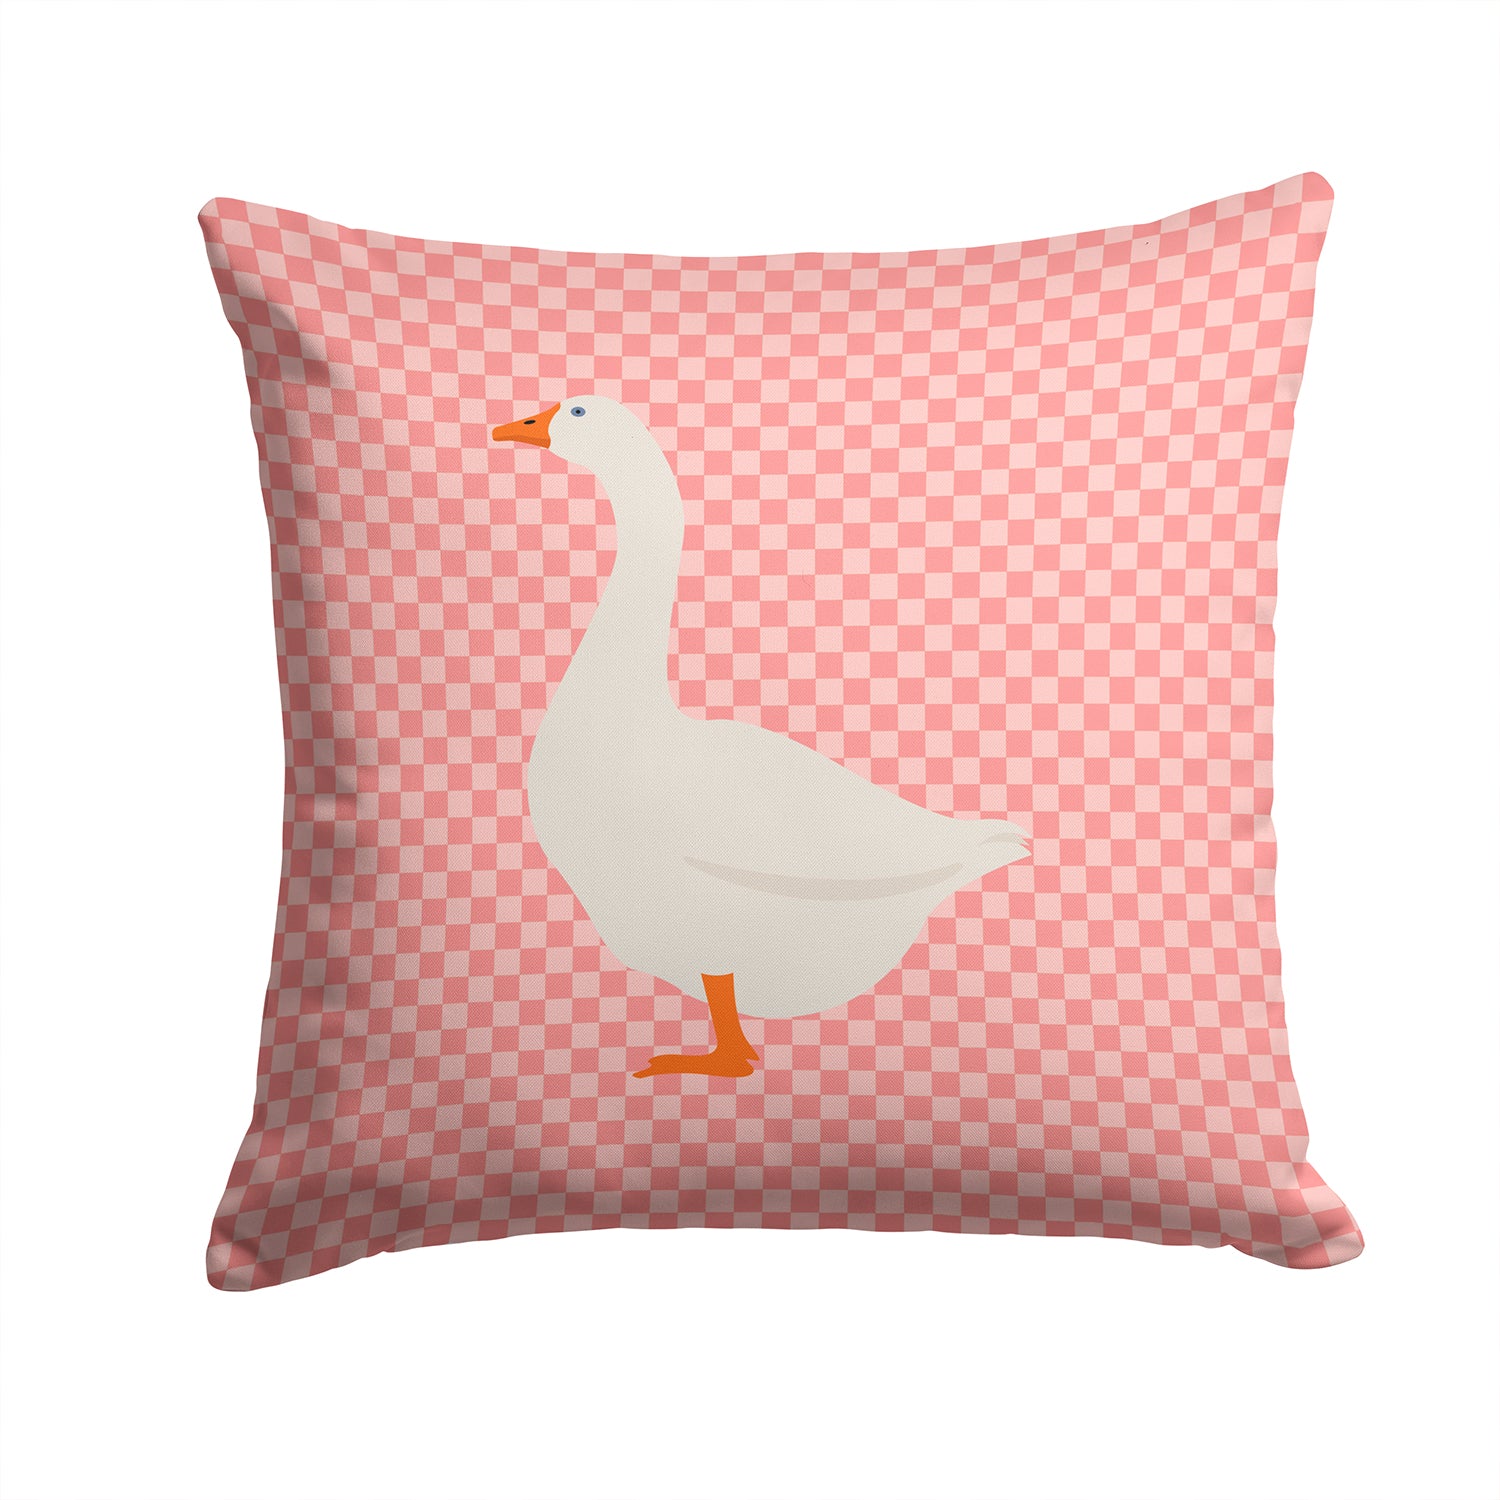 Embden Goose Pink Check Fabric Decorative Pillow BB7892PW1414 - the-store.com